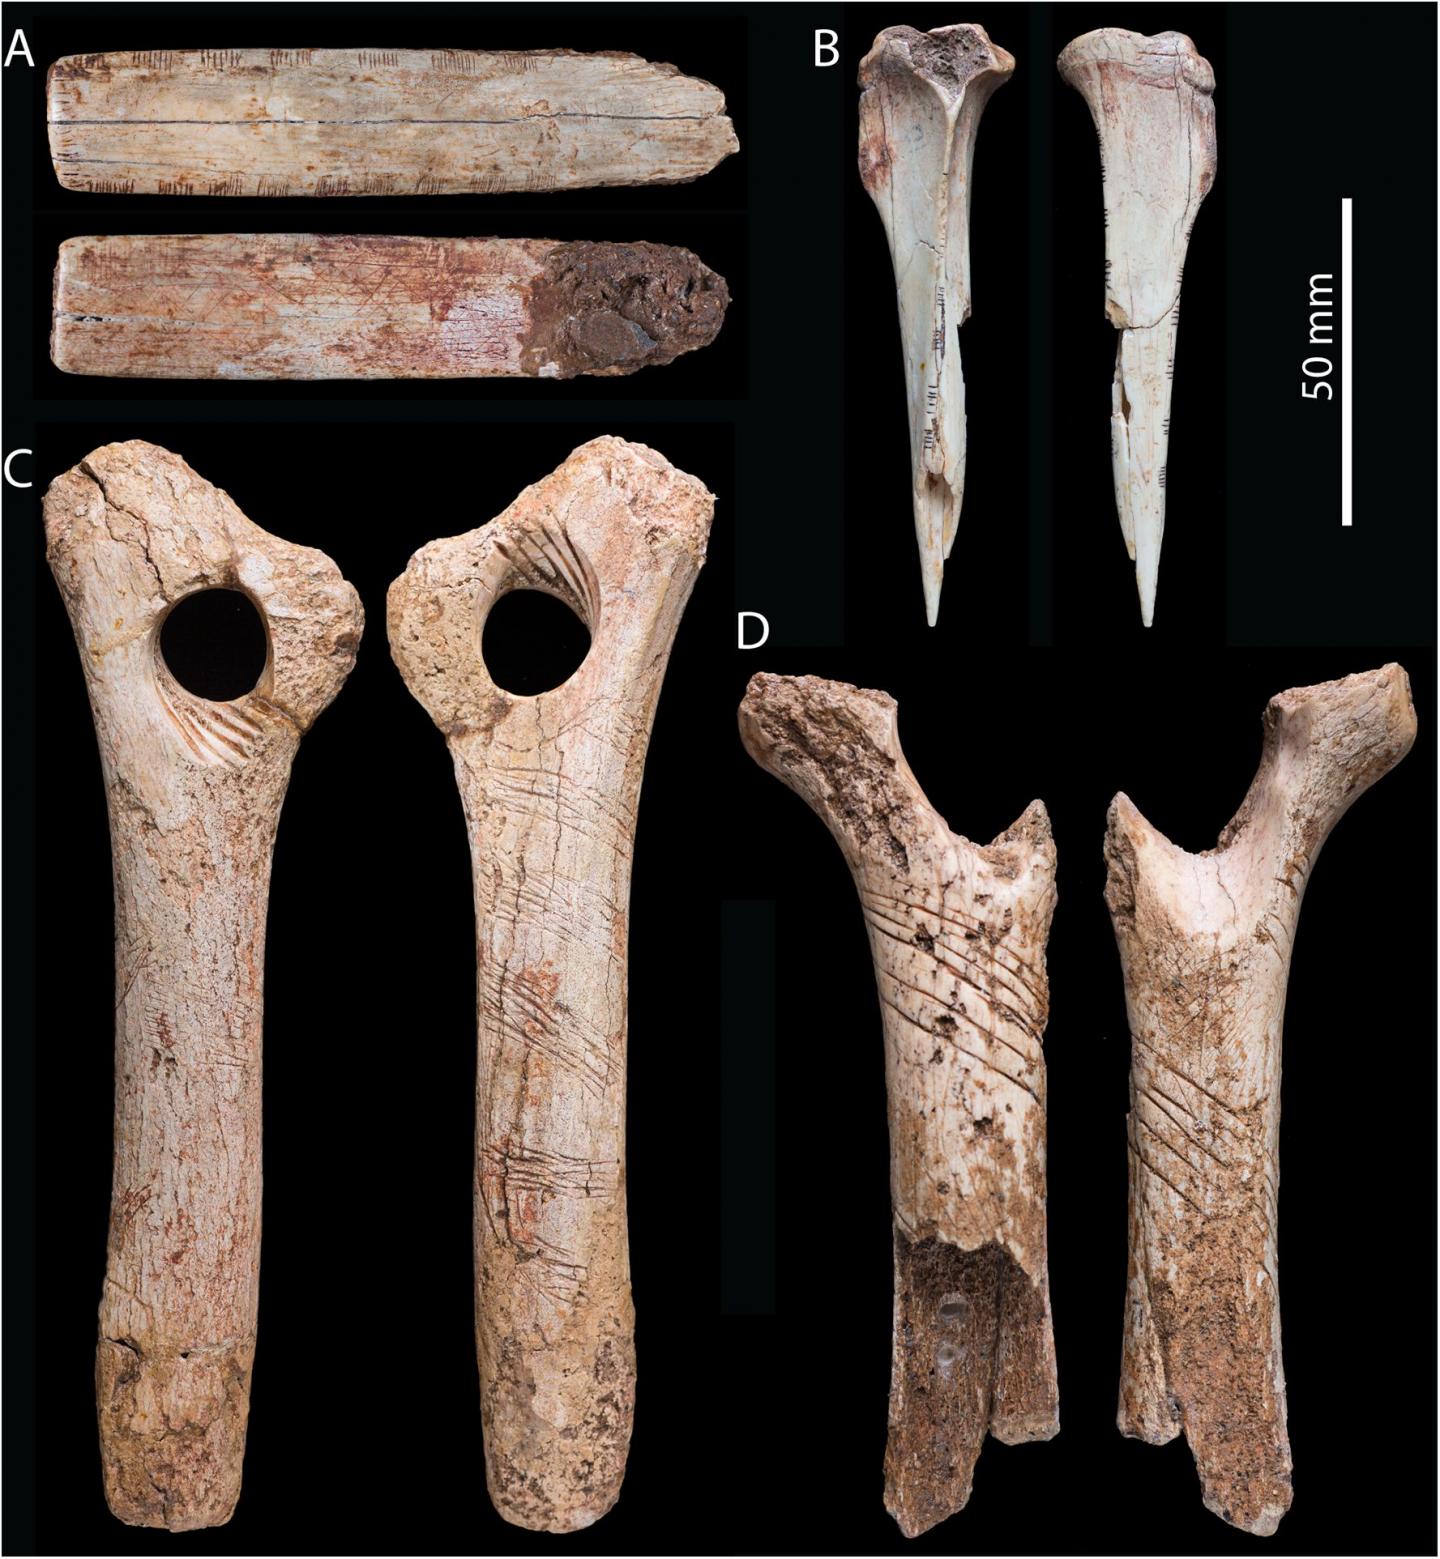 Human Bones May Have Been Engraved As Part of a Cannibalistic Ritual